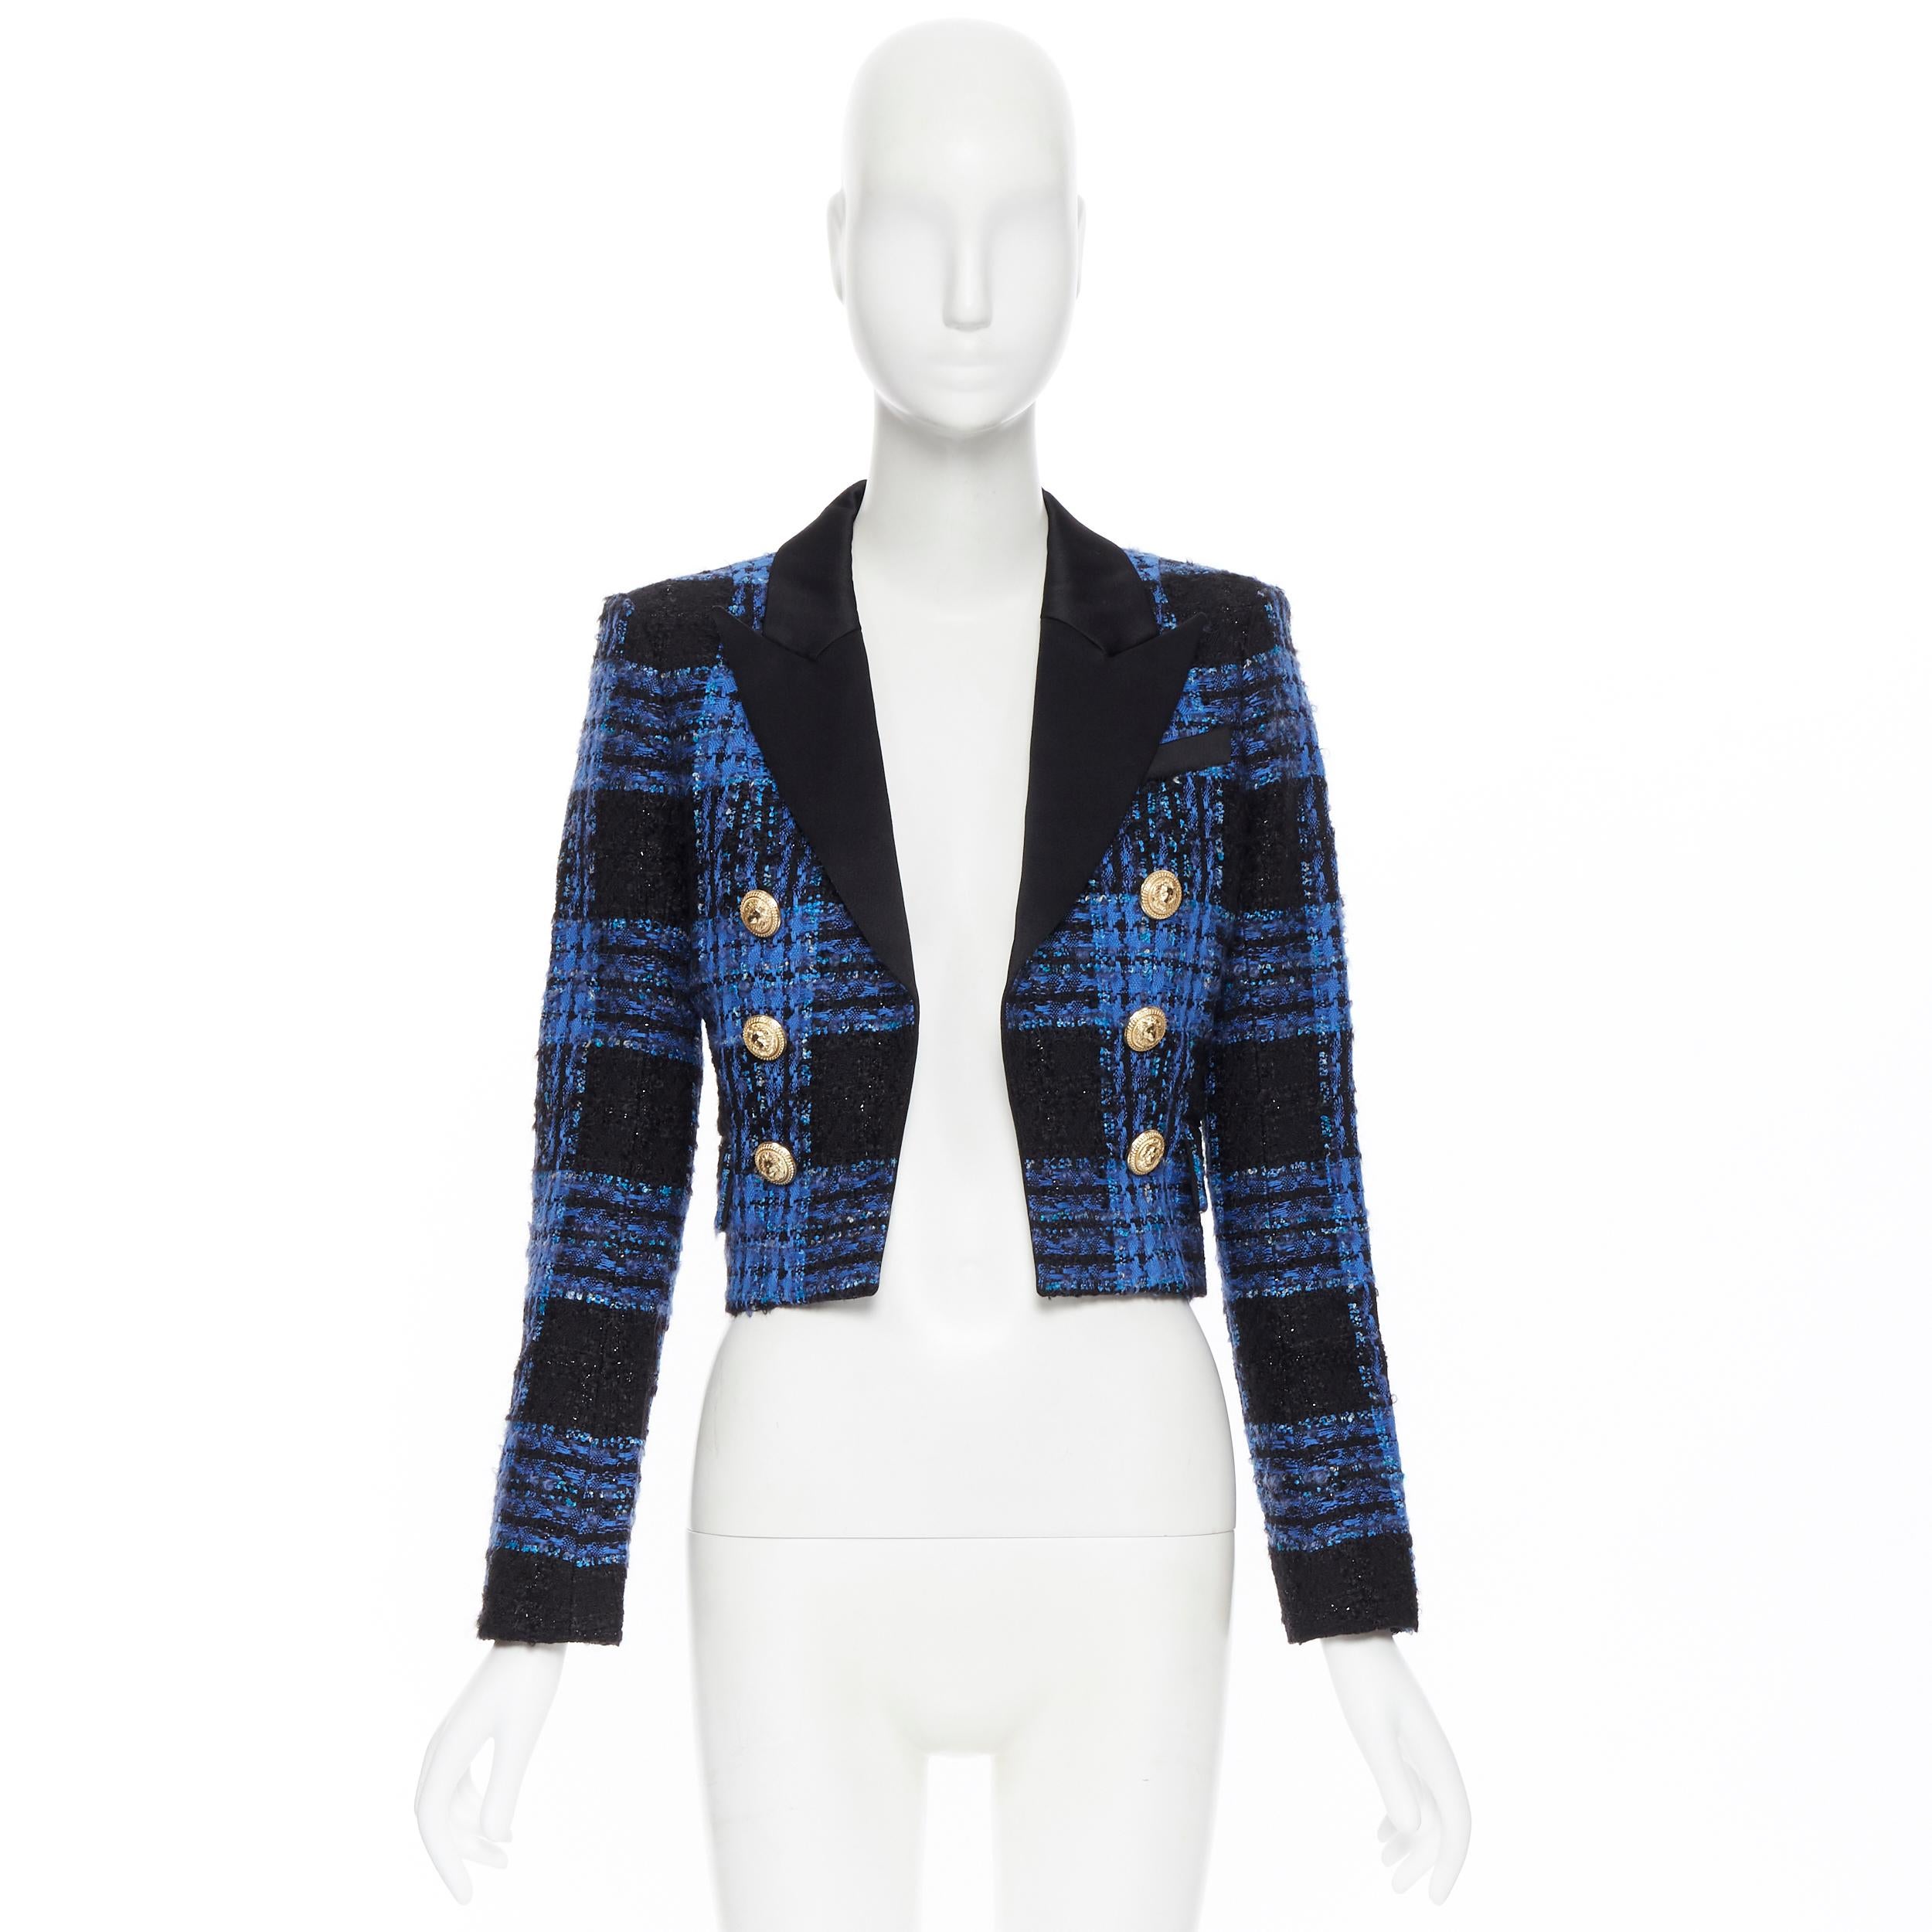 new BALMAIN blue black tweed gold button cropped double breasted jacket FR36 XS
Brand: Balmain
Designer: Olivier Rousteing
Model Name / Style: Double breasted jacket
Material: Tweed
Color: Blue
Pattern: Check
Closure: Button
Extra Detail: Black and